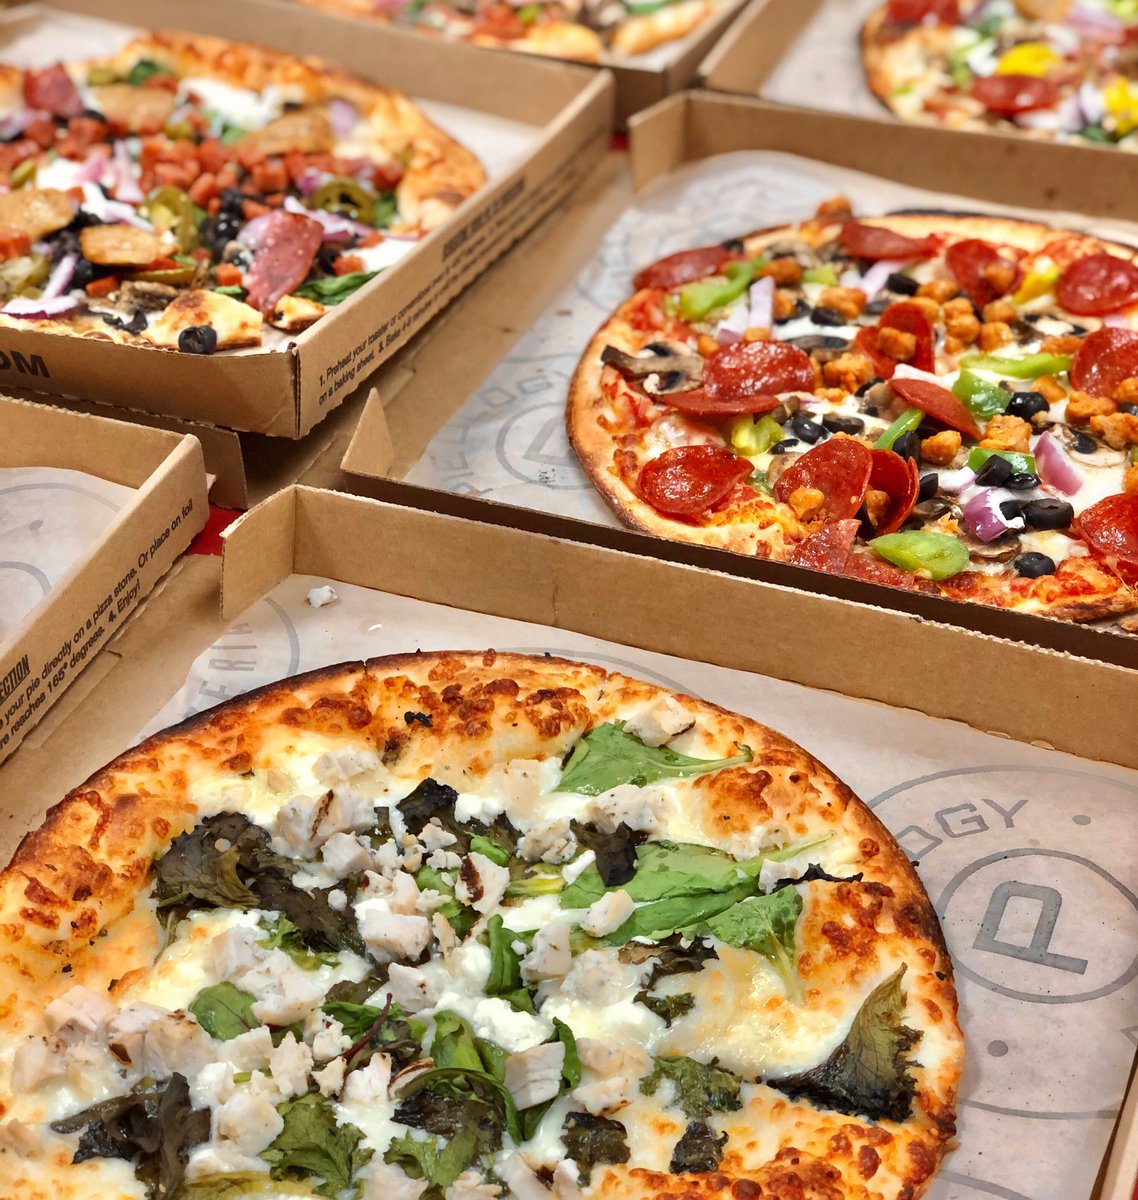 What are your favorite toppings to put on your @pieology pizza? 🍕